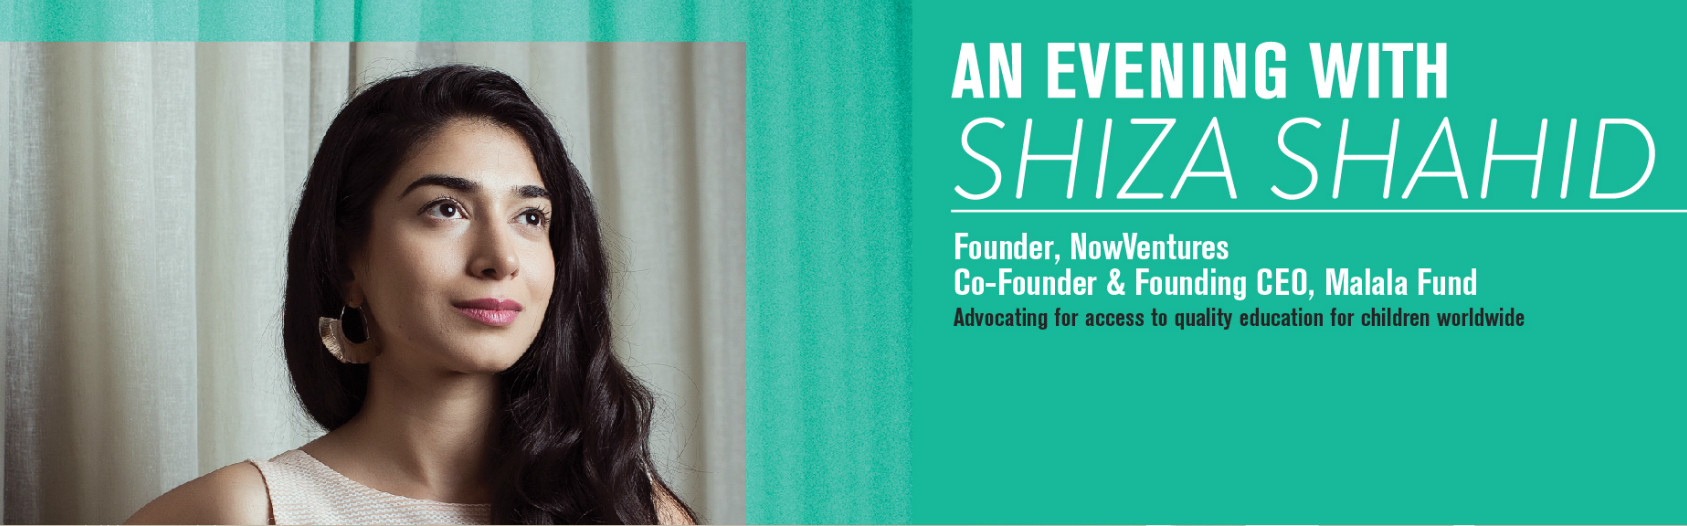 An Evening With: Shiza Shahid banner